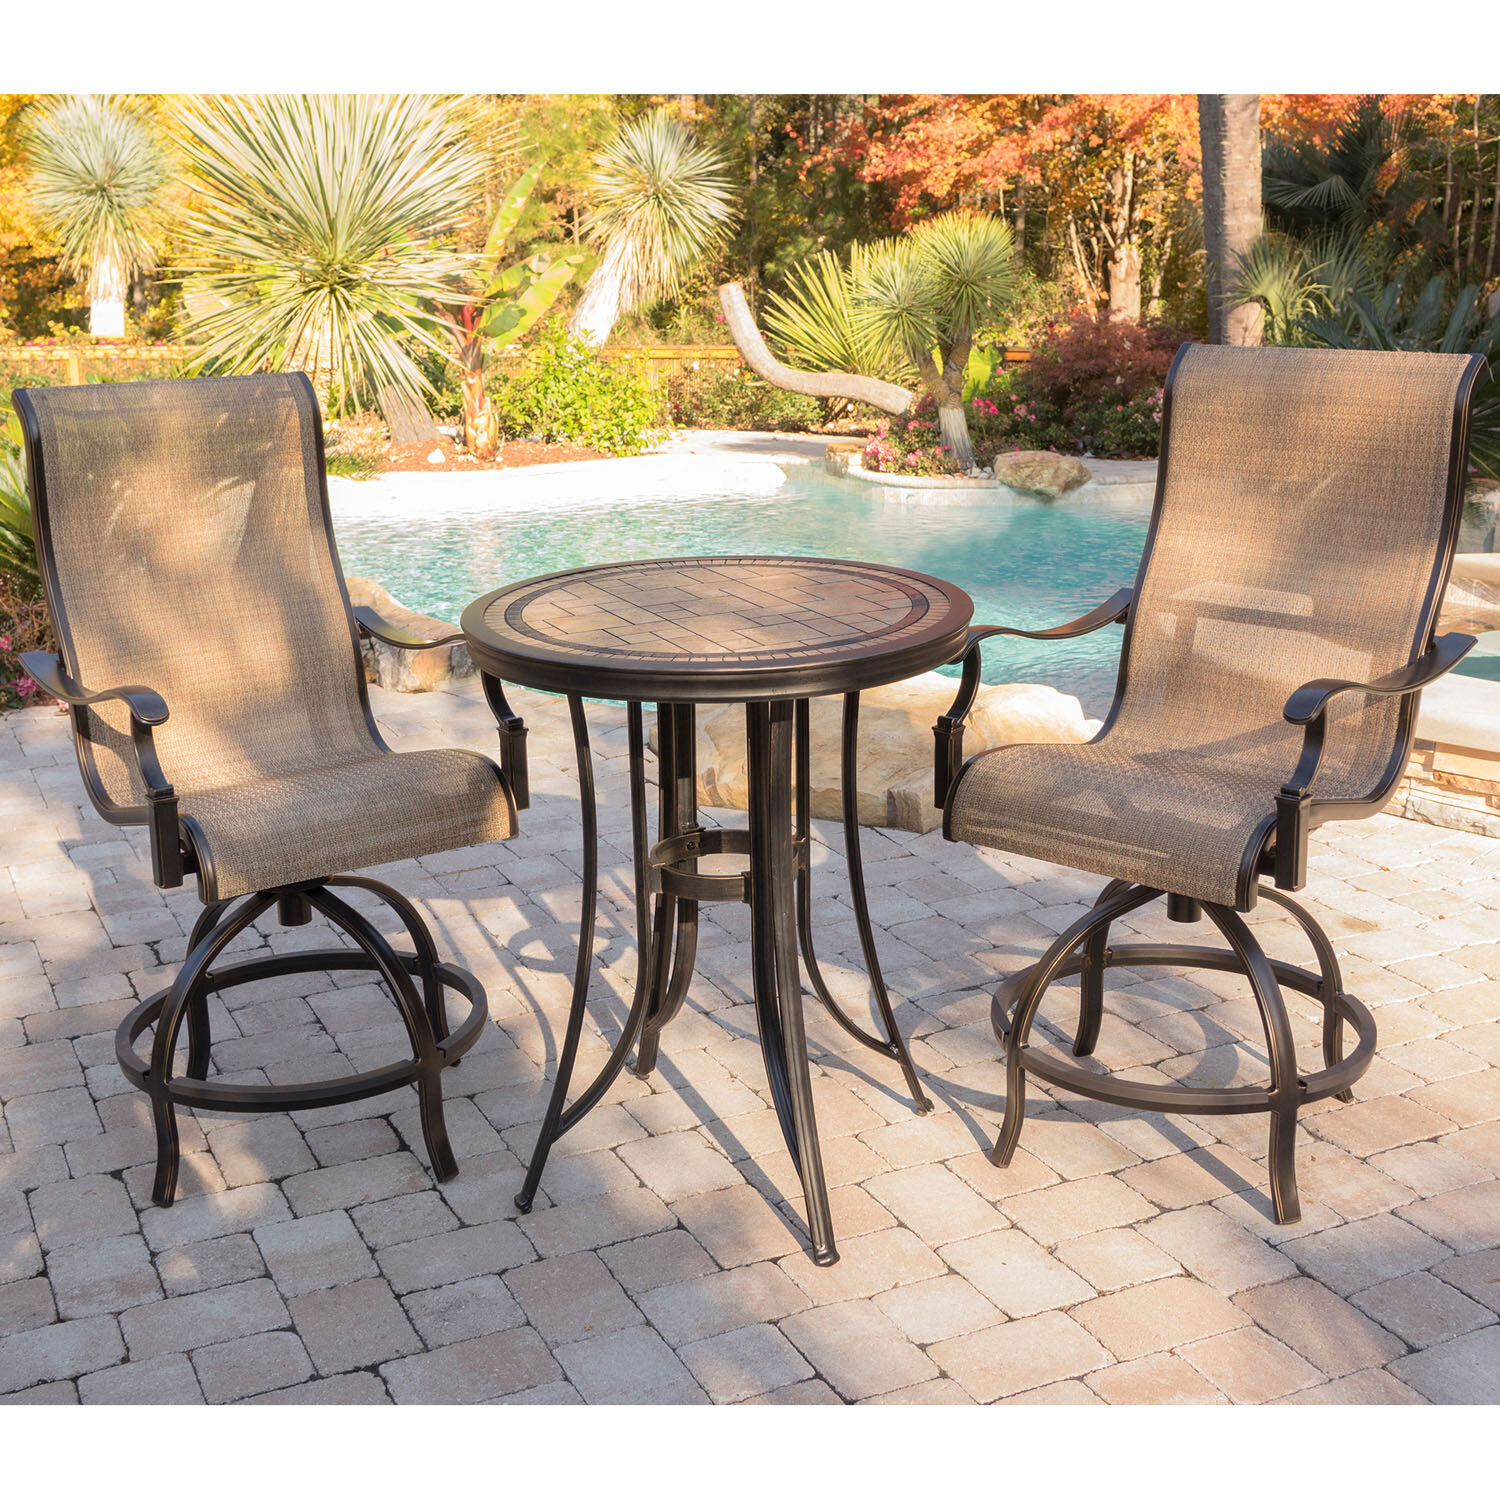 Patio Furniture Sets Of This Quality Last For Years. 3 Piece Outdoor